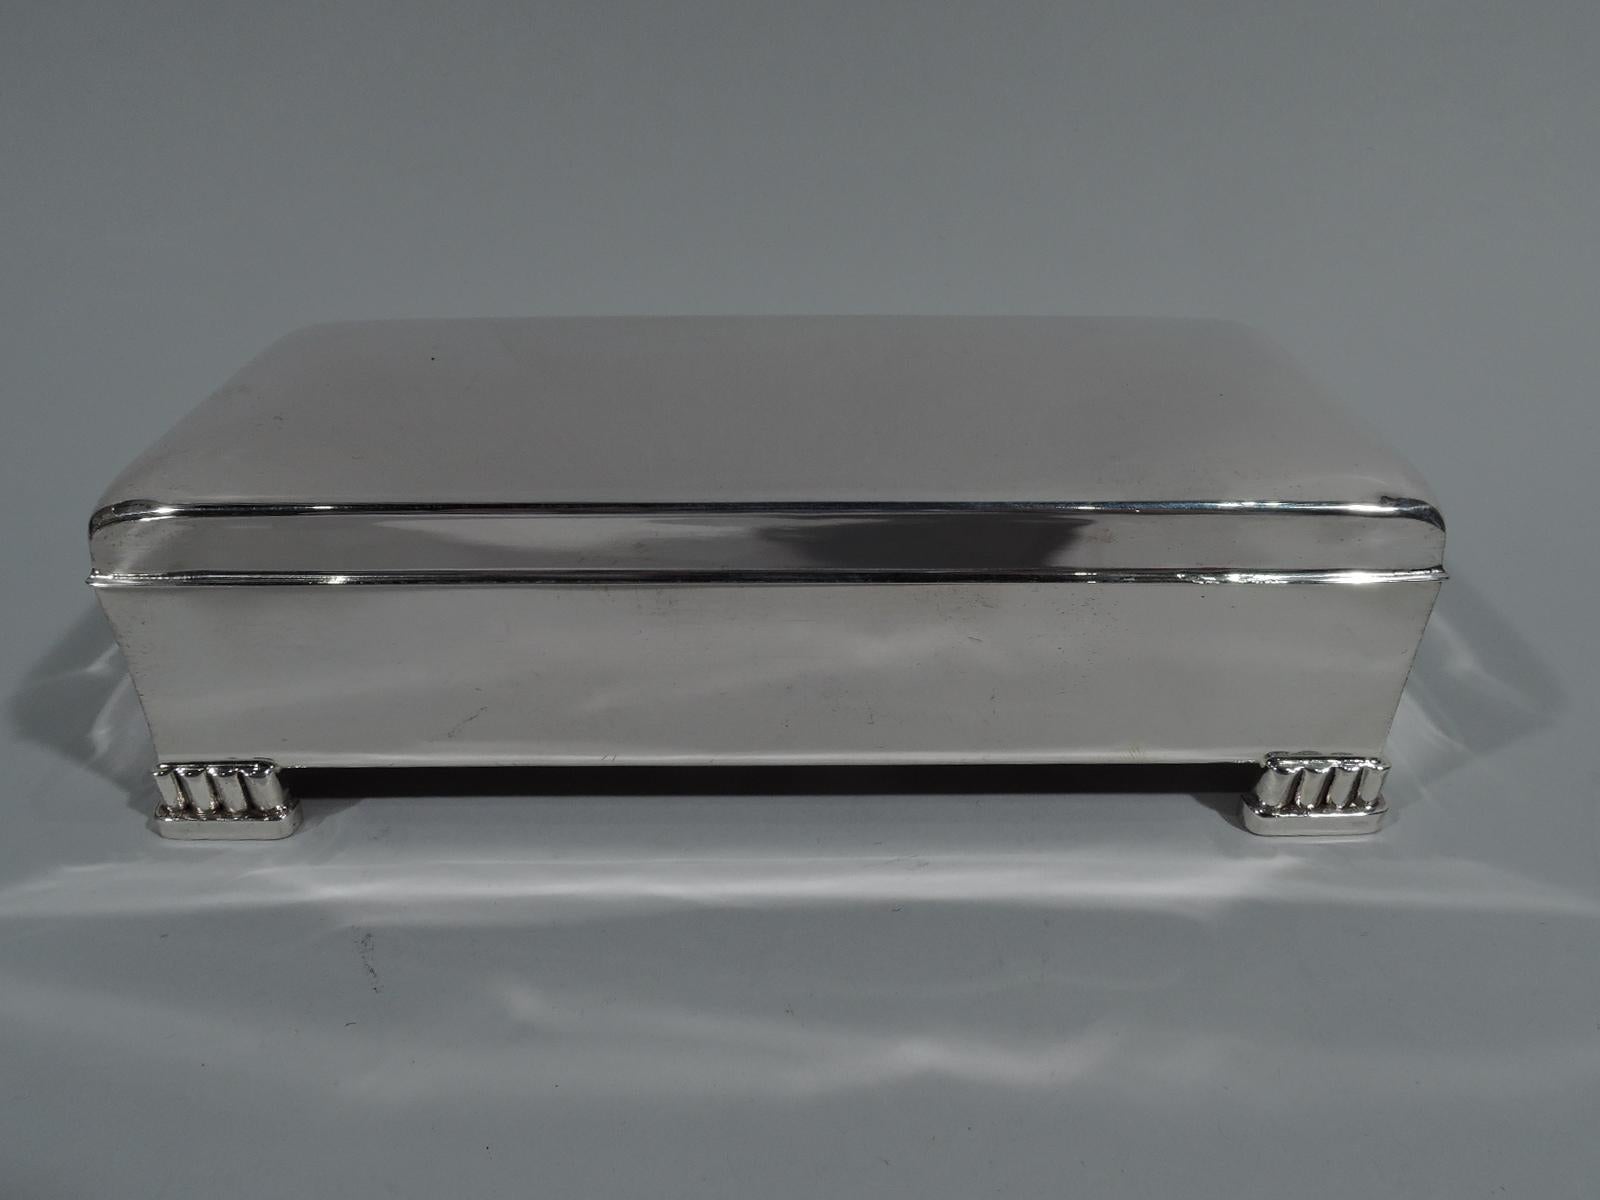 Classic Mid-Century Modern sterling silver box. Made by Poole in Taunton, Mass. Rectangular with straight sides. Cover hinged with curved top, straight sides, and flat overhanging rim. Corner supports in form of bracket colonnade on base. Box